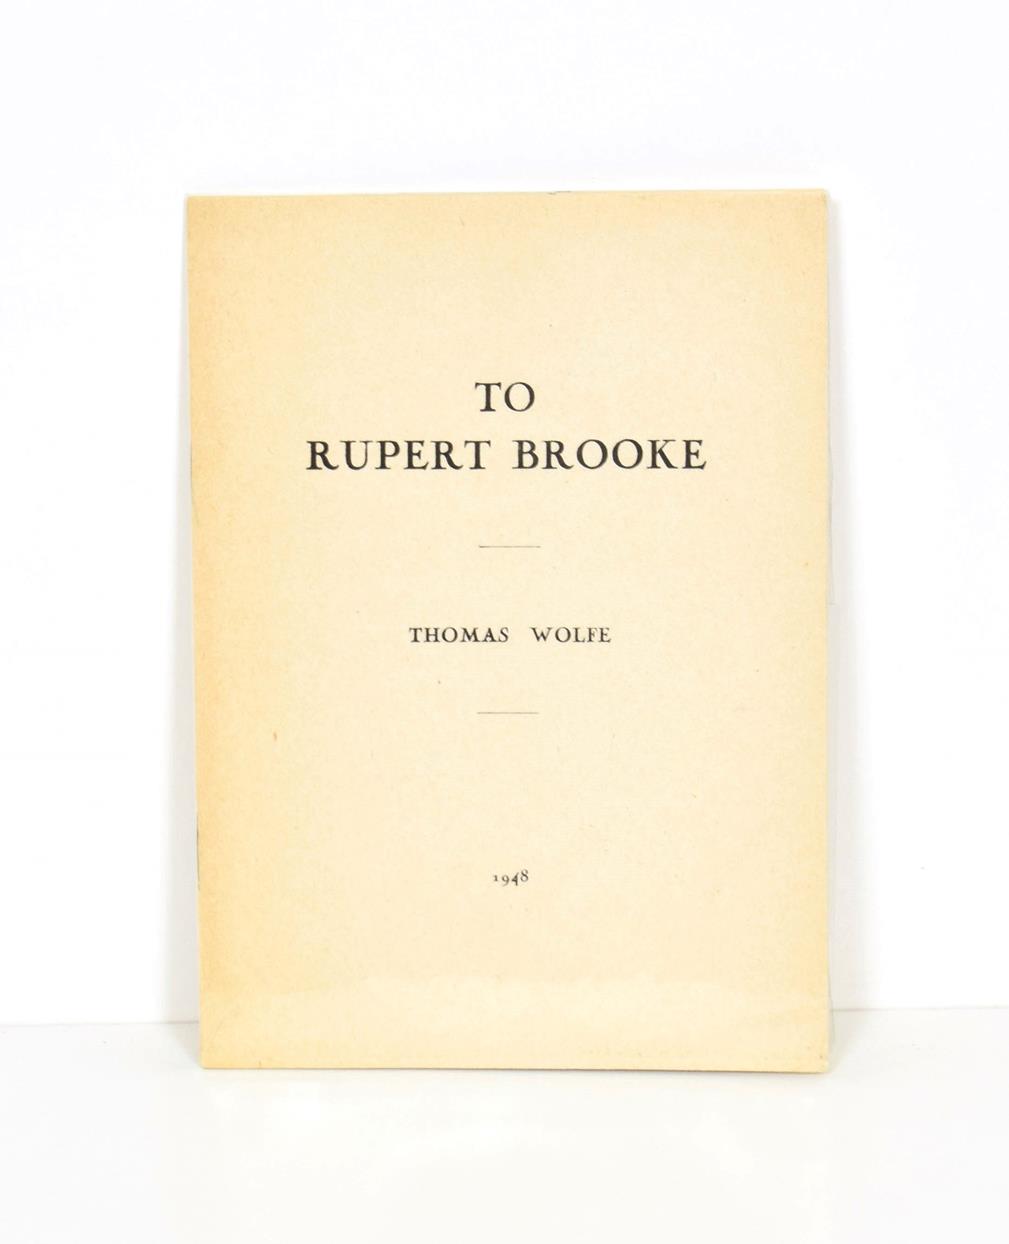 Lot 49 - Wolfe (Thomas) To Rupert Brooke, Paris: Lecram Press, 1948, numbered limited edition of 100 copies